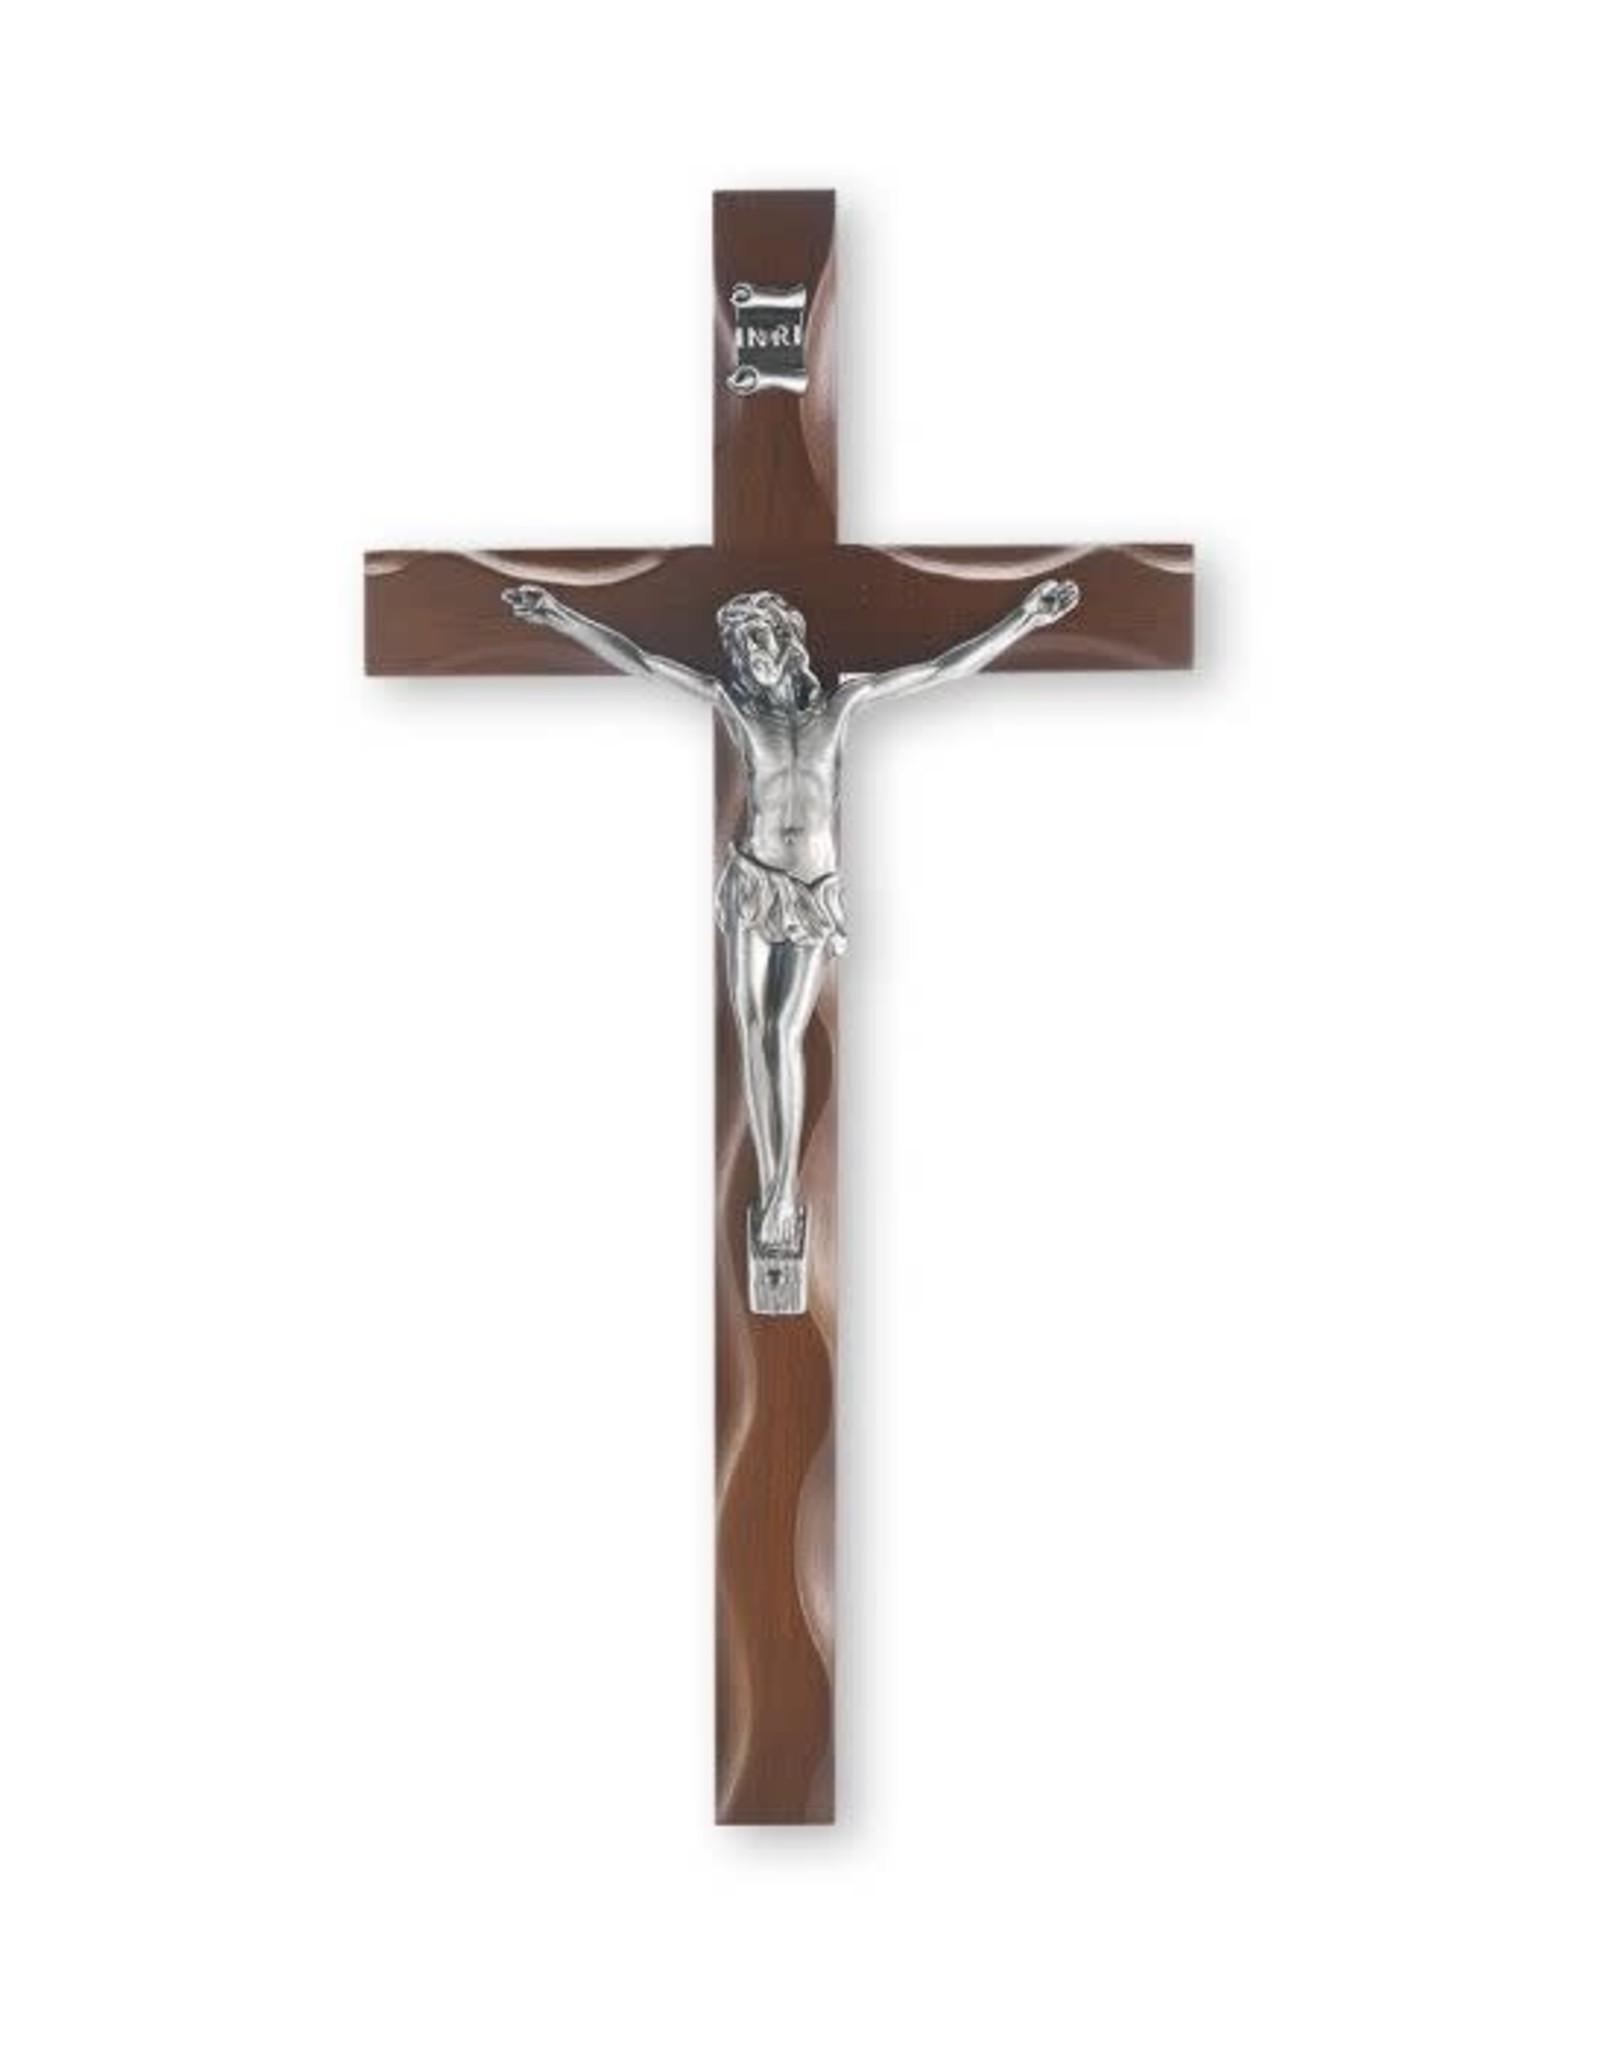 10" Walnut Crucifix with Antique Silver Plated Corpus